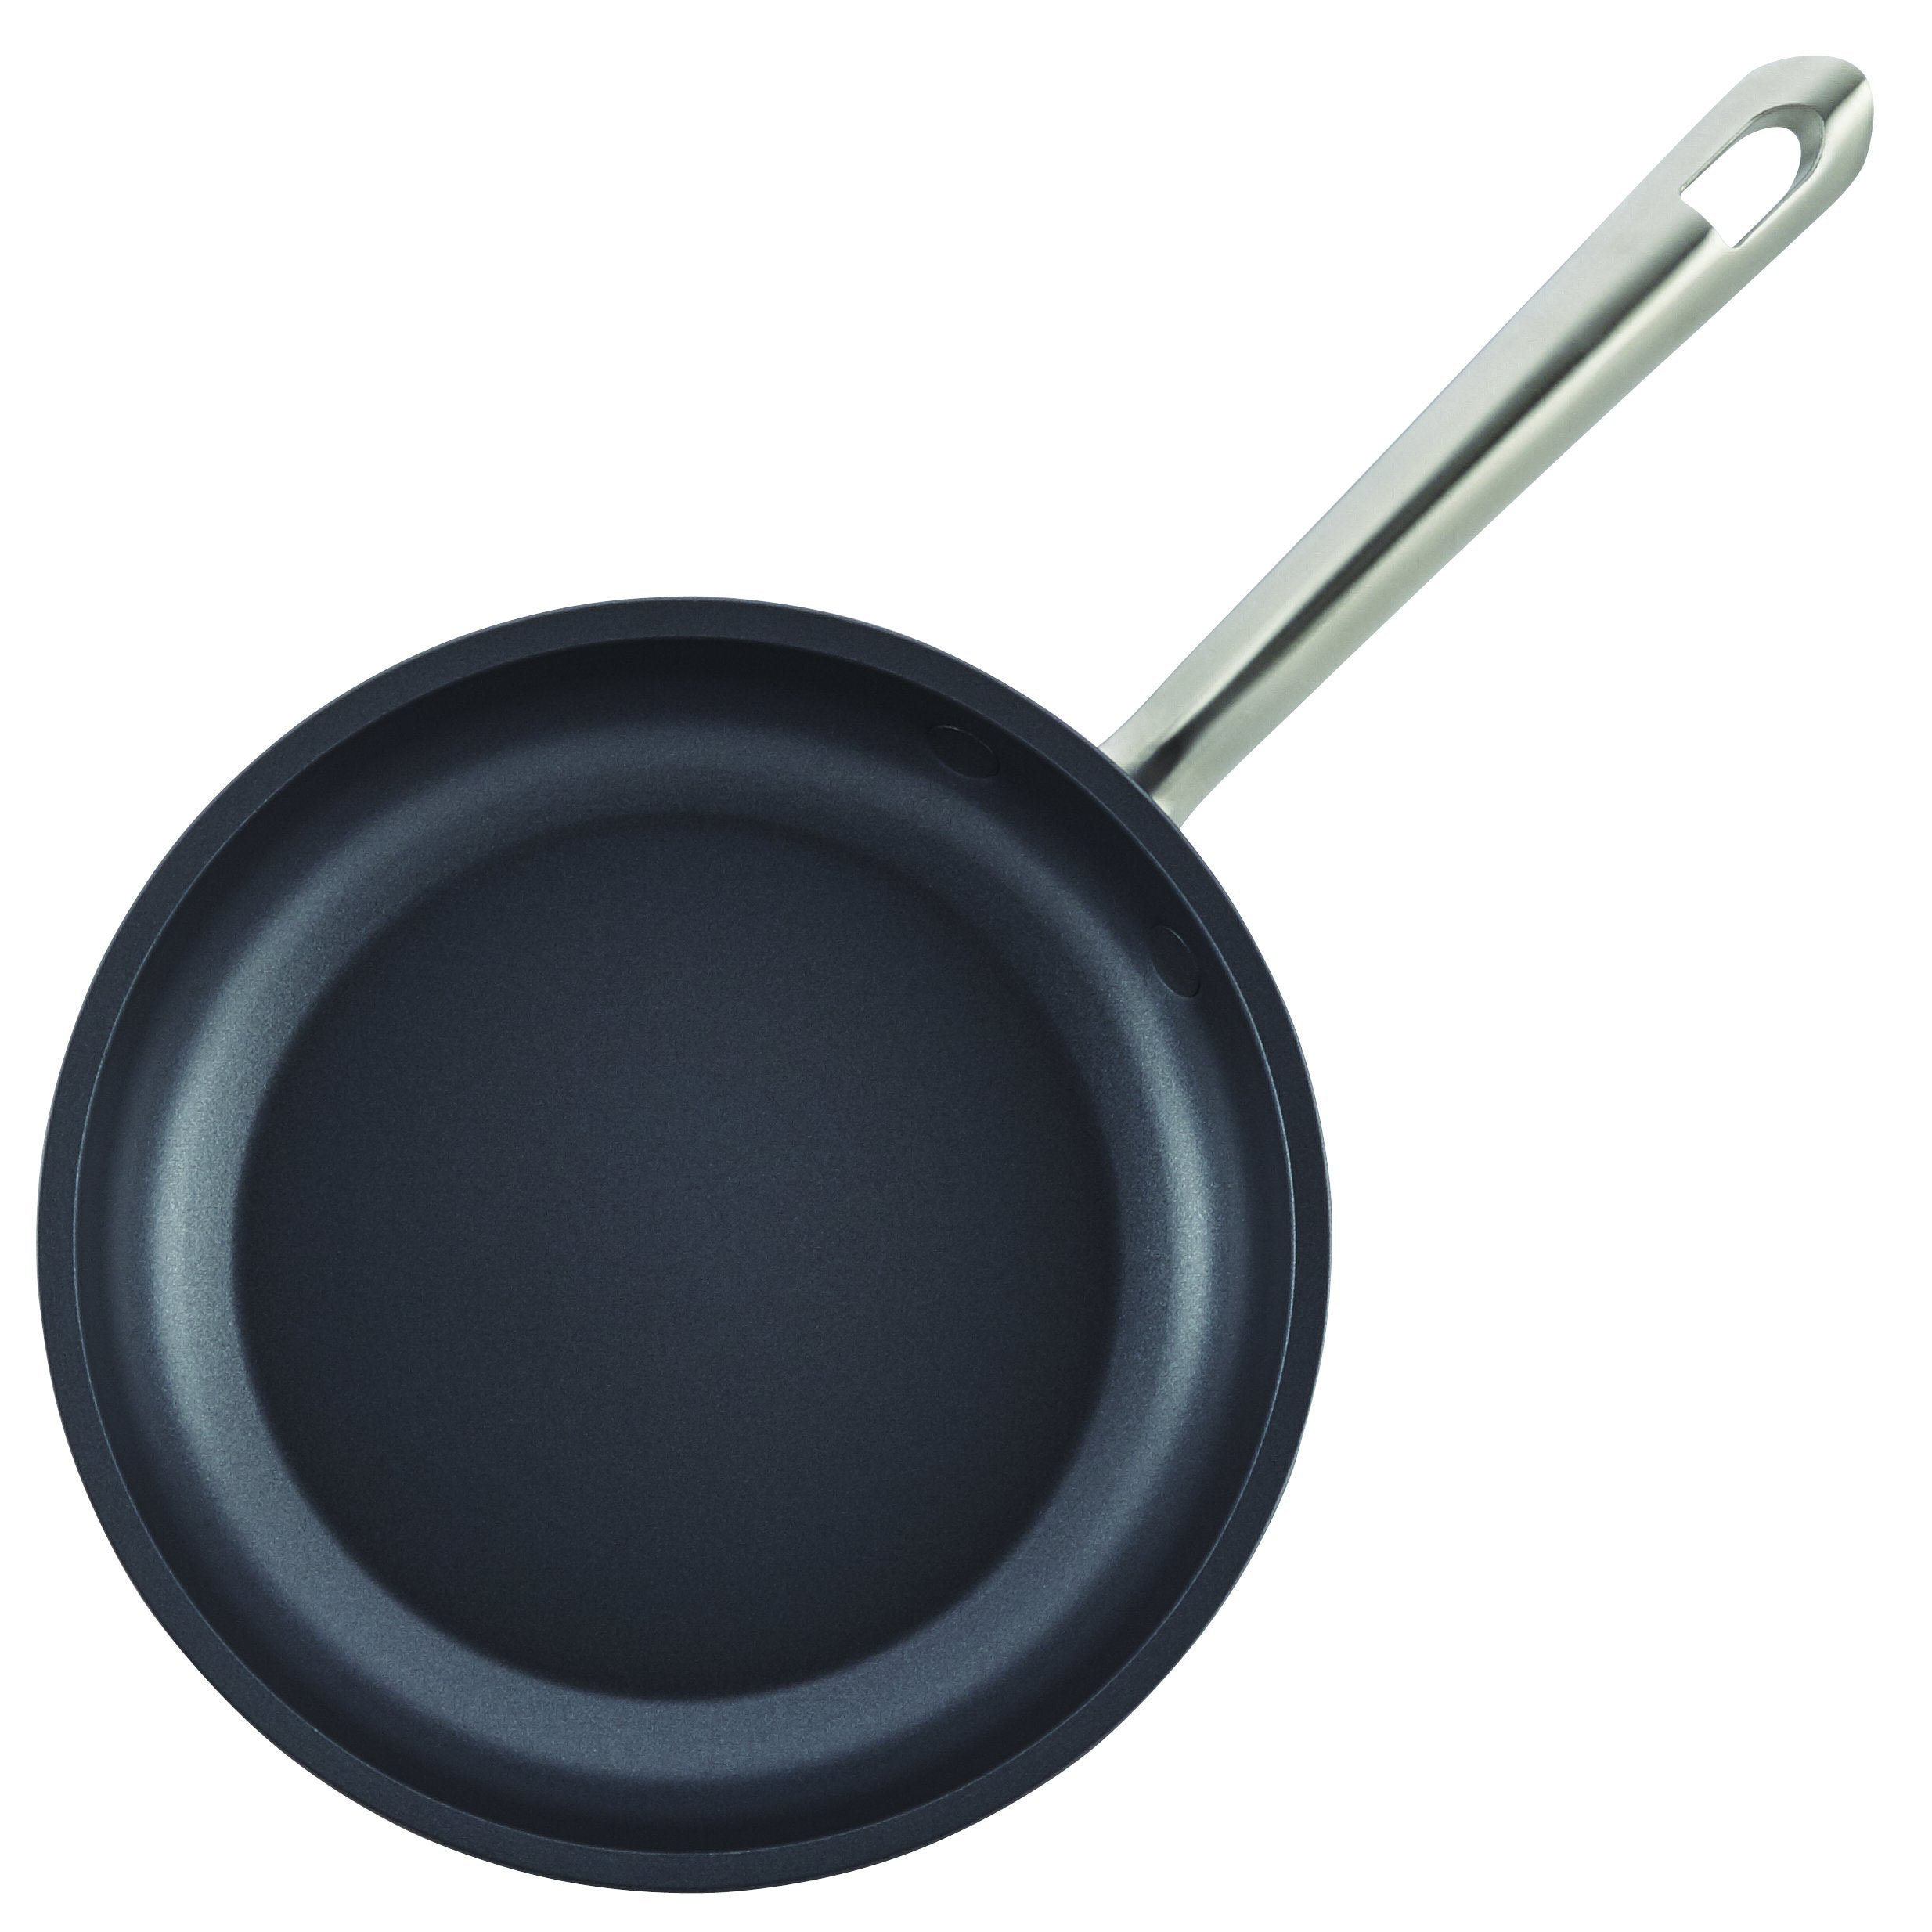 Anolon Accolade Hard Anodized Nonstick Frying Pan / Skillet, 8 Inch, Gray &  Reviews